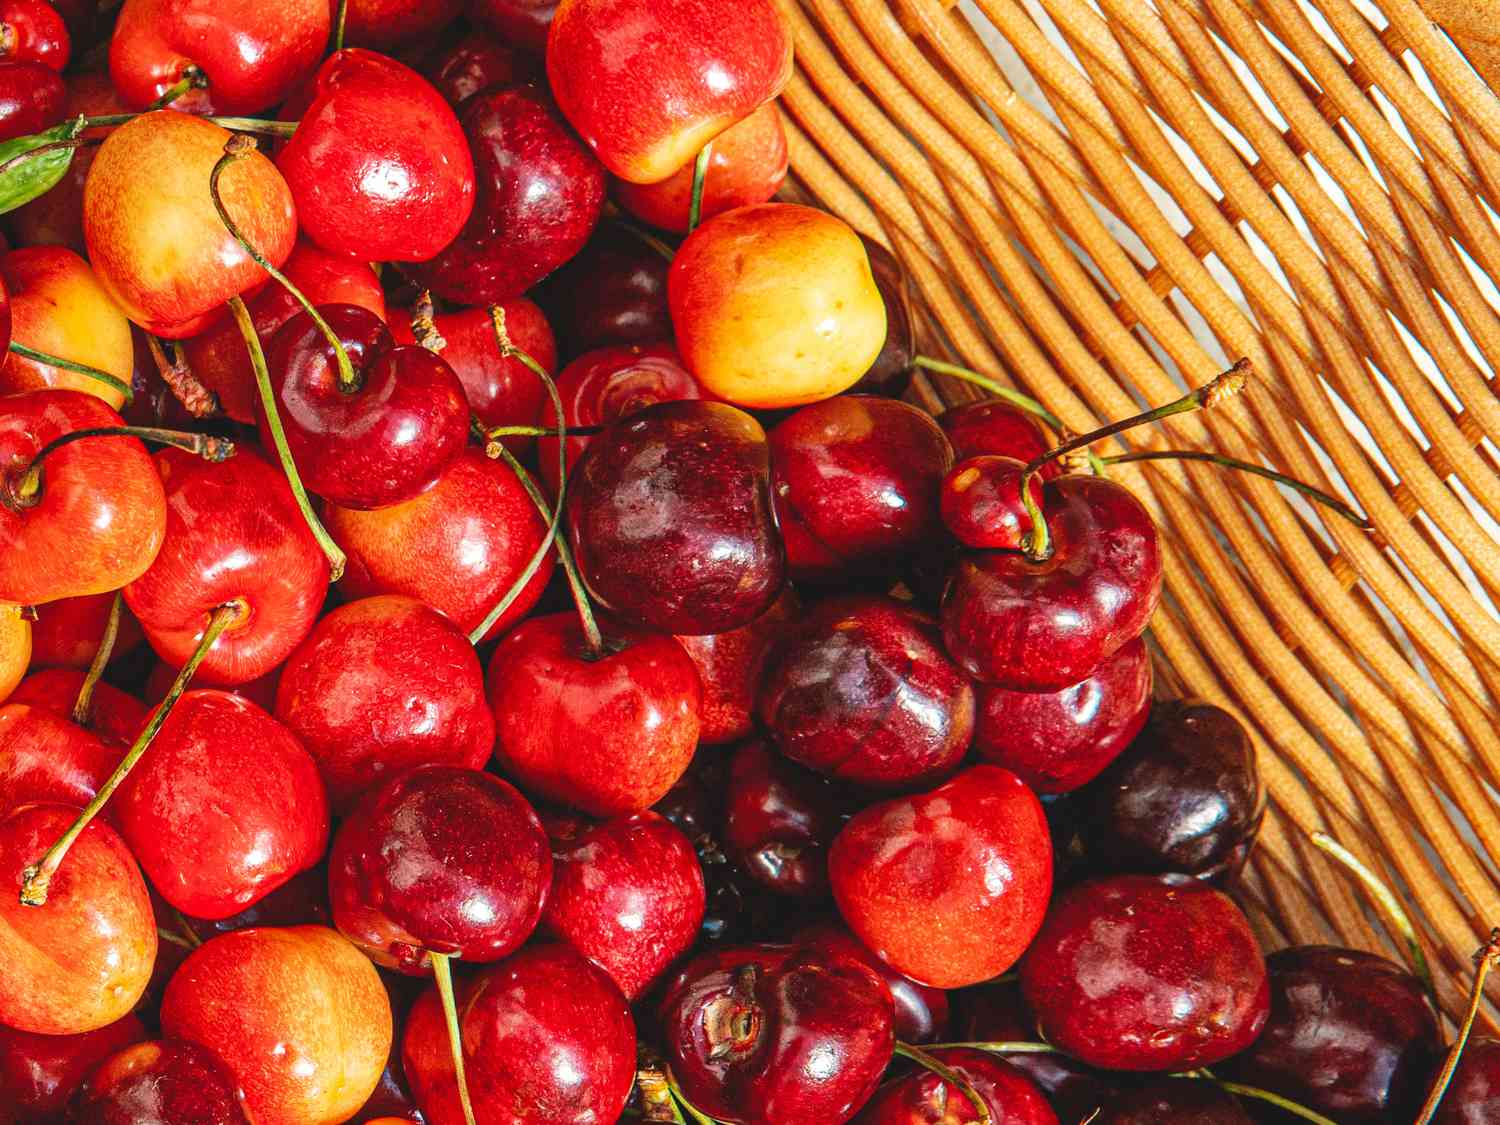 Overhead view of cherries in a basket